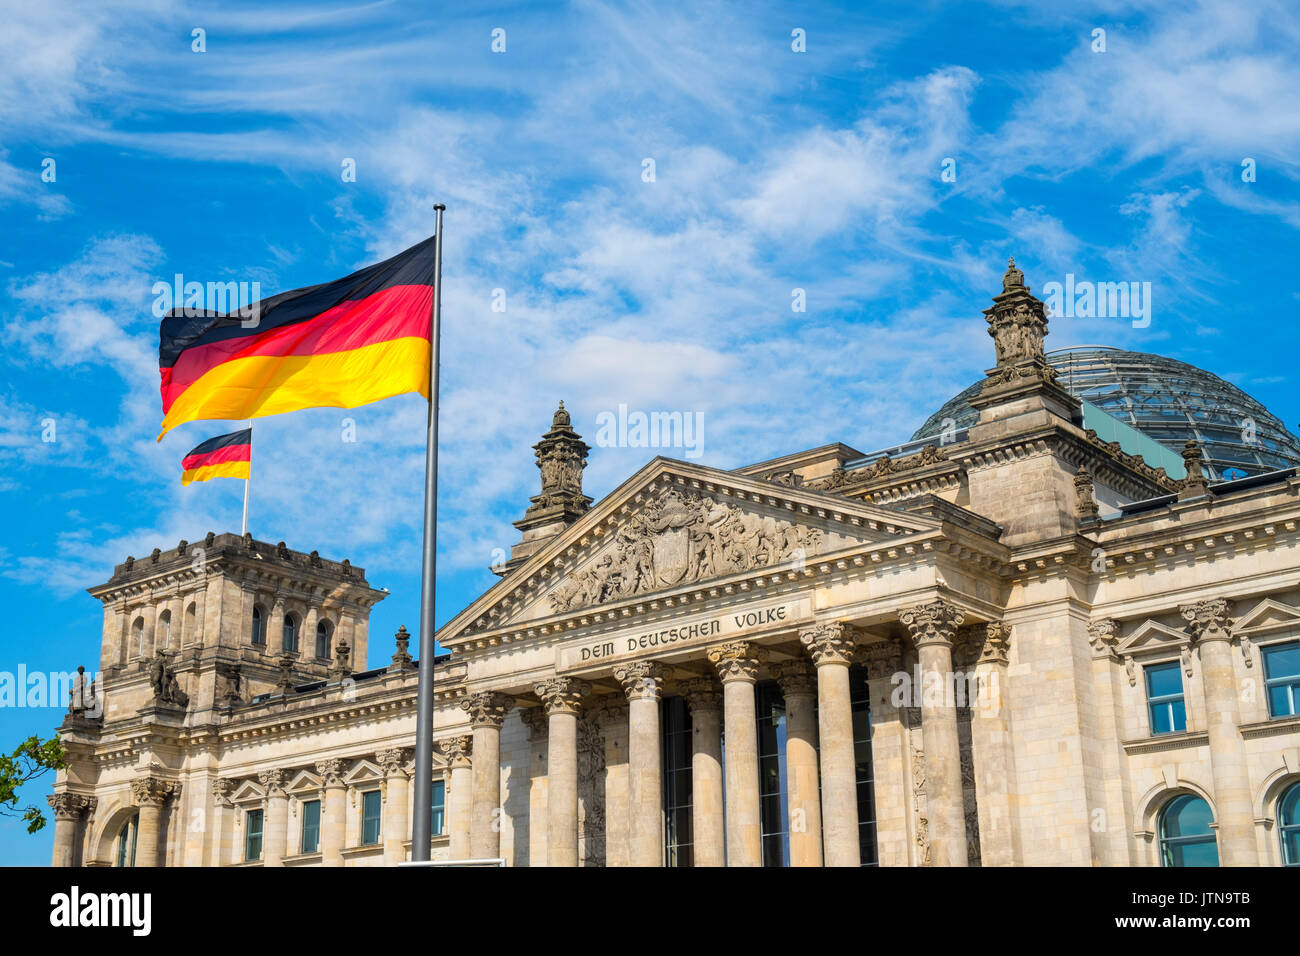 The German Reichstag parliament building in Berlin Germany Stock Photo